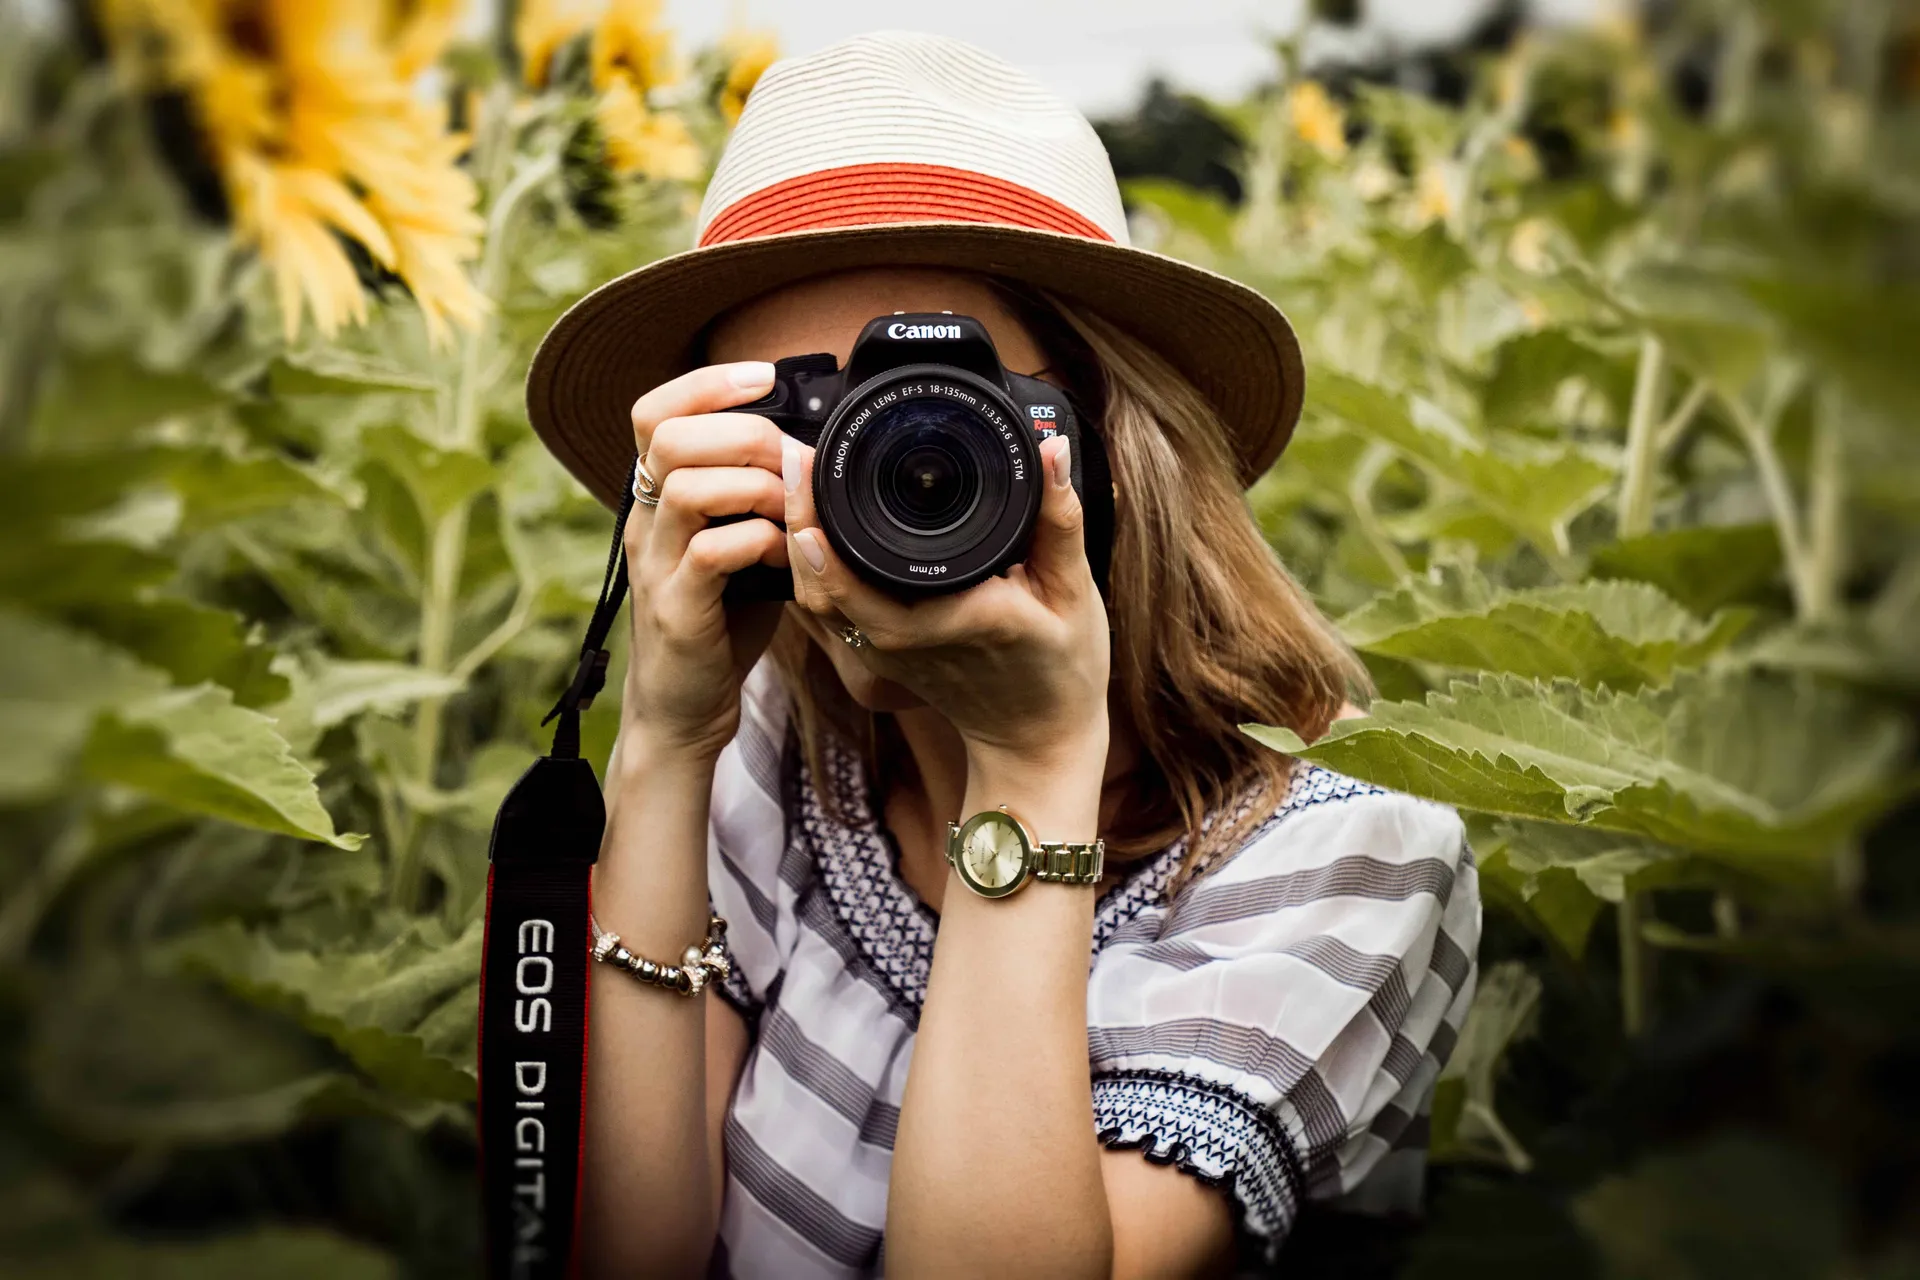 What you need to know before for choosing your first camera